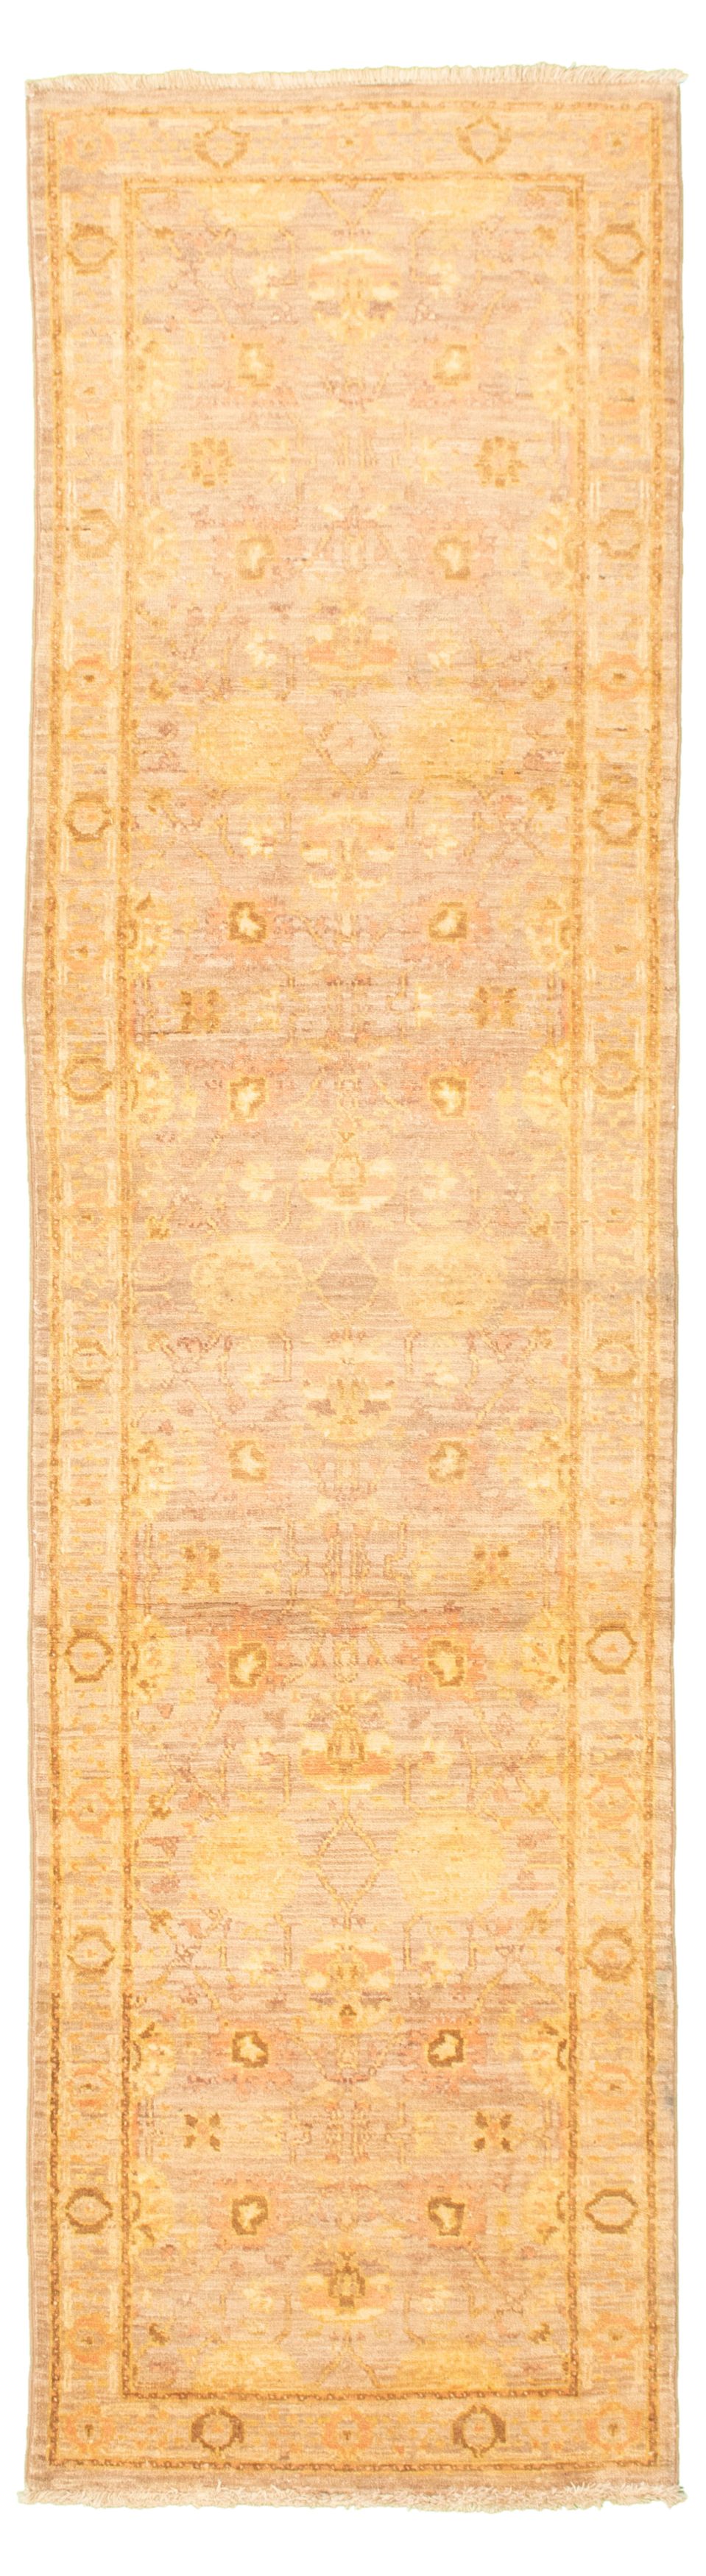 Hand-knotted Chobi Finest Grey Wool Rug 2'8" x 9'4" Size: 2'8" x 9'4"  